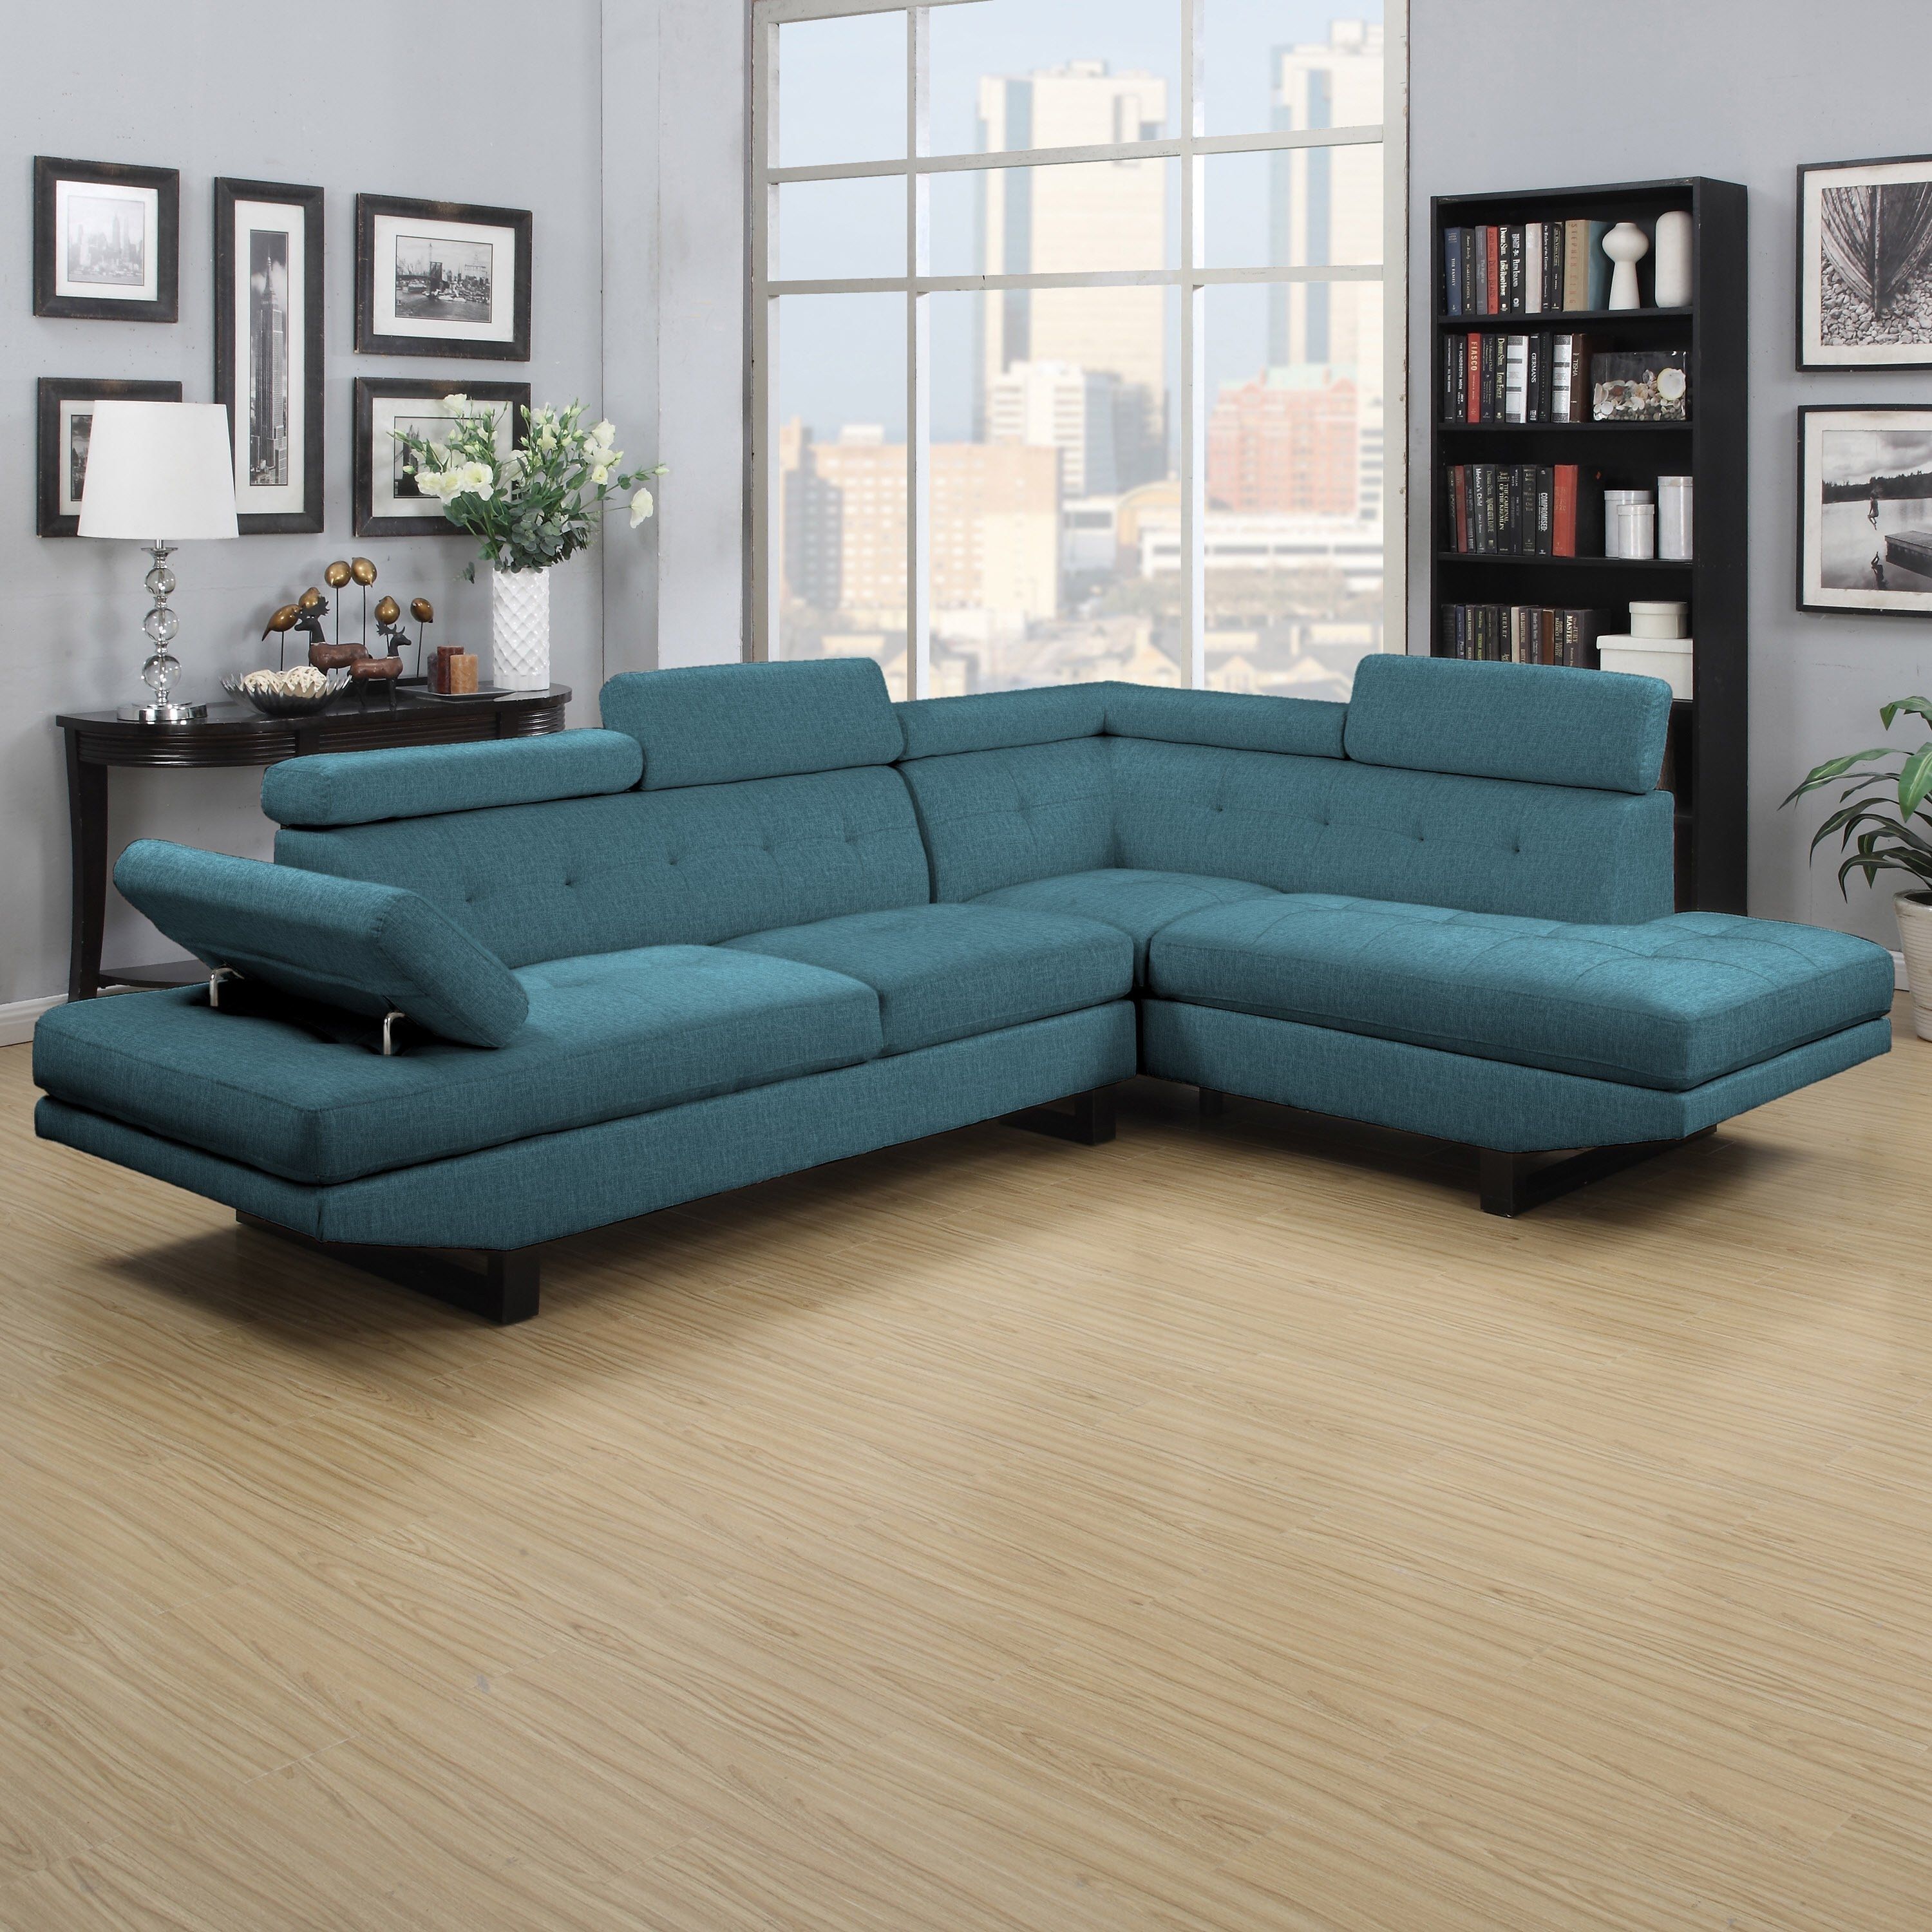 Shop Clay Alder Home Pope Street Caribbean Blue Linen 2 Piece Within Alder 4 Piece Sectionals (View 11 of 30)